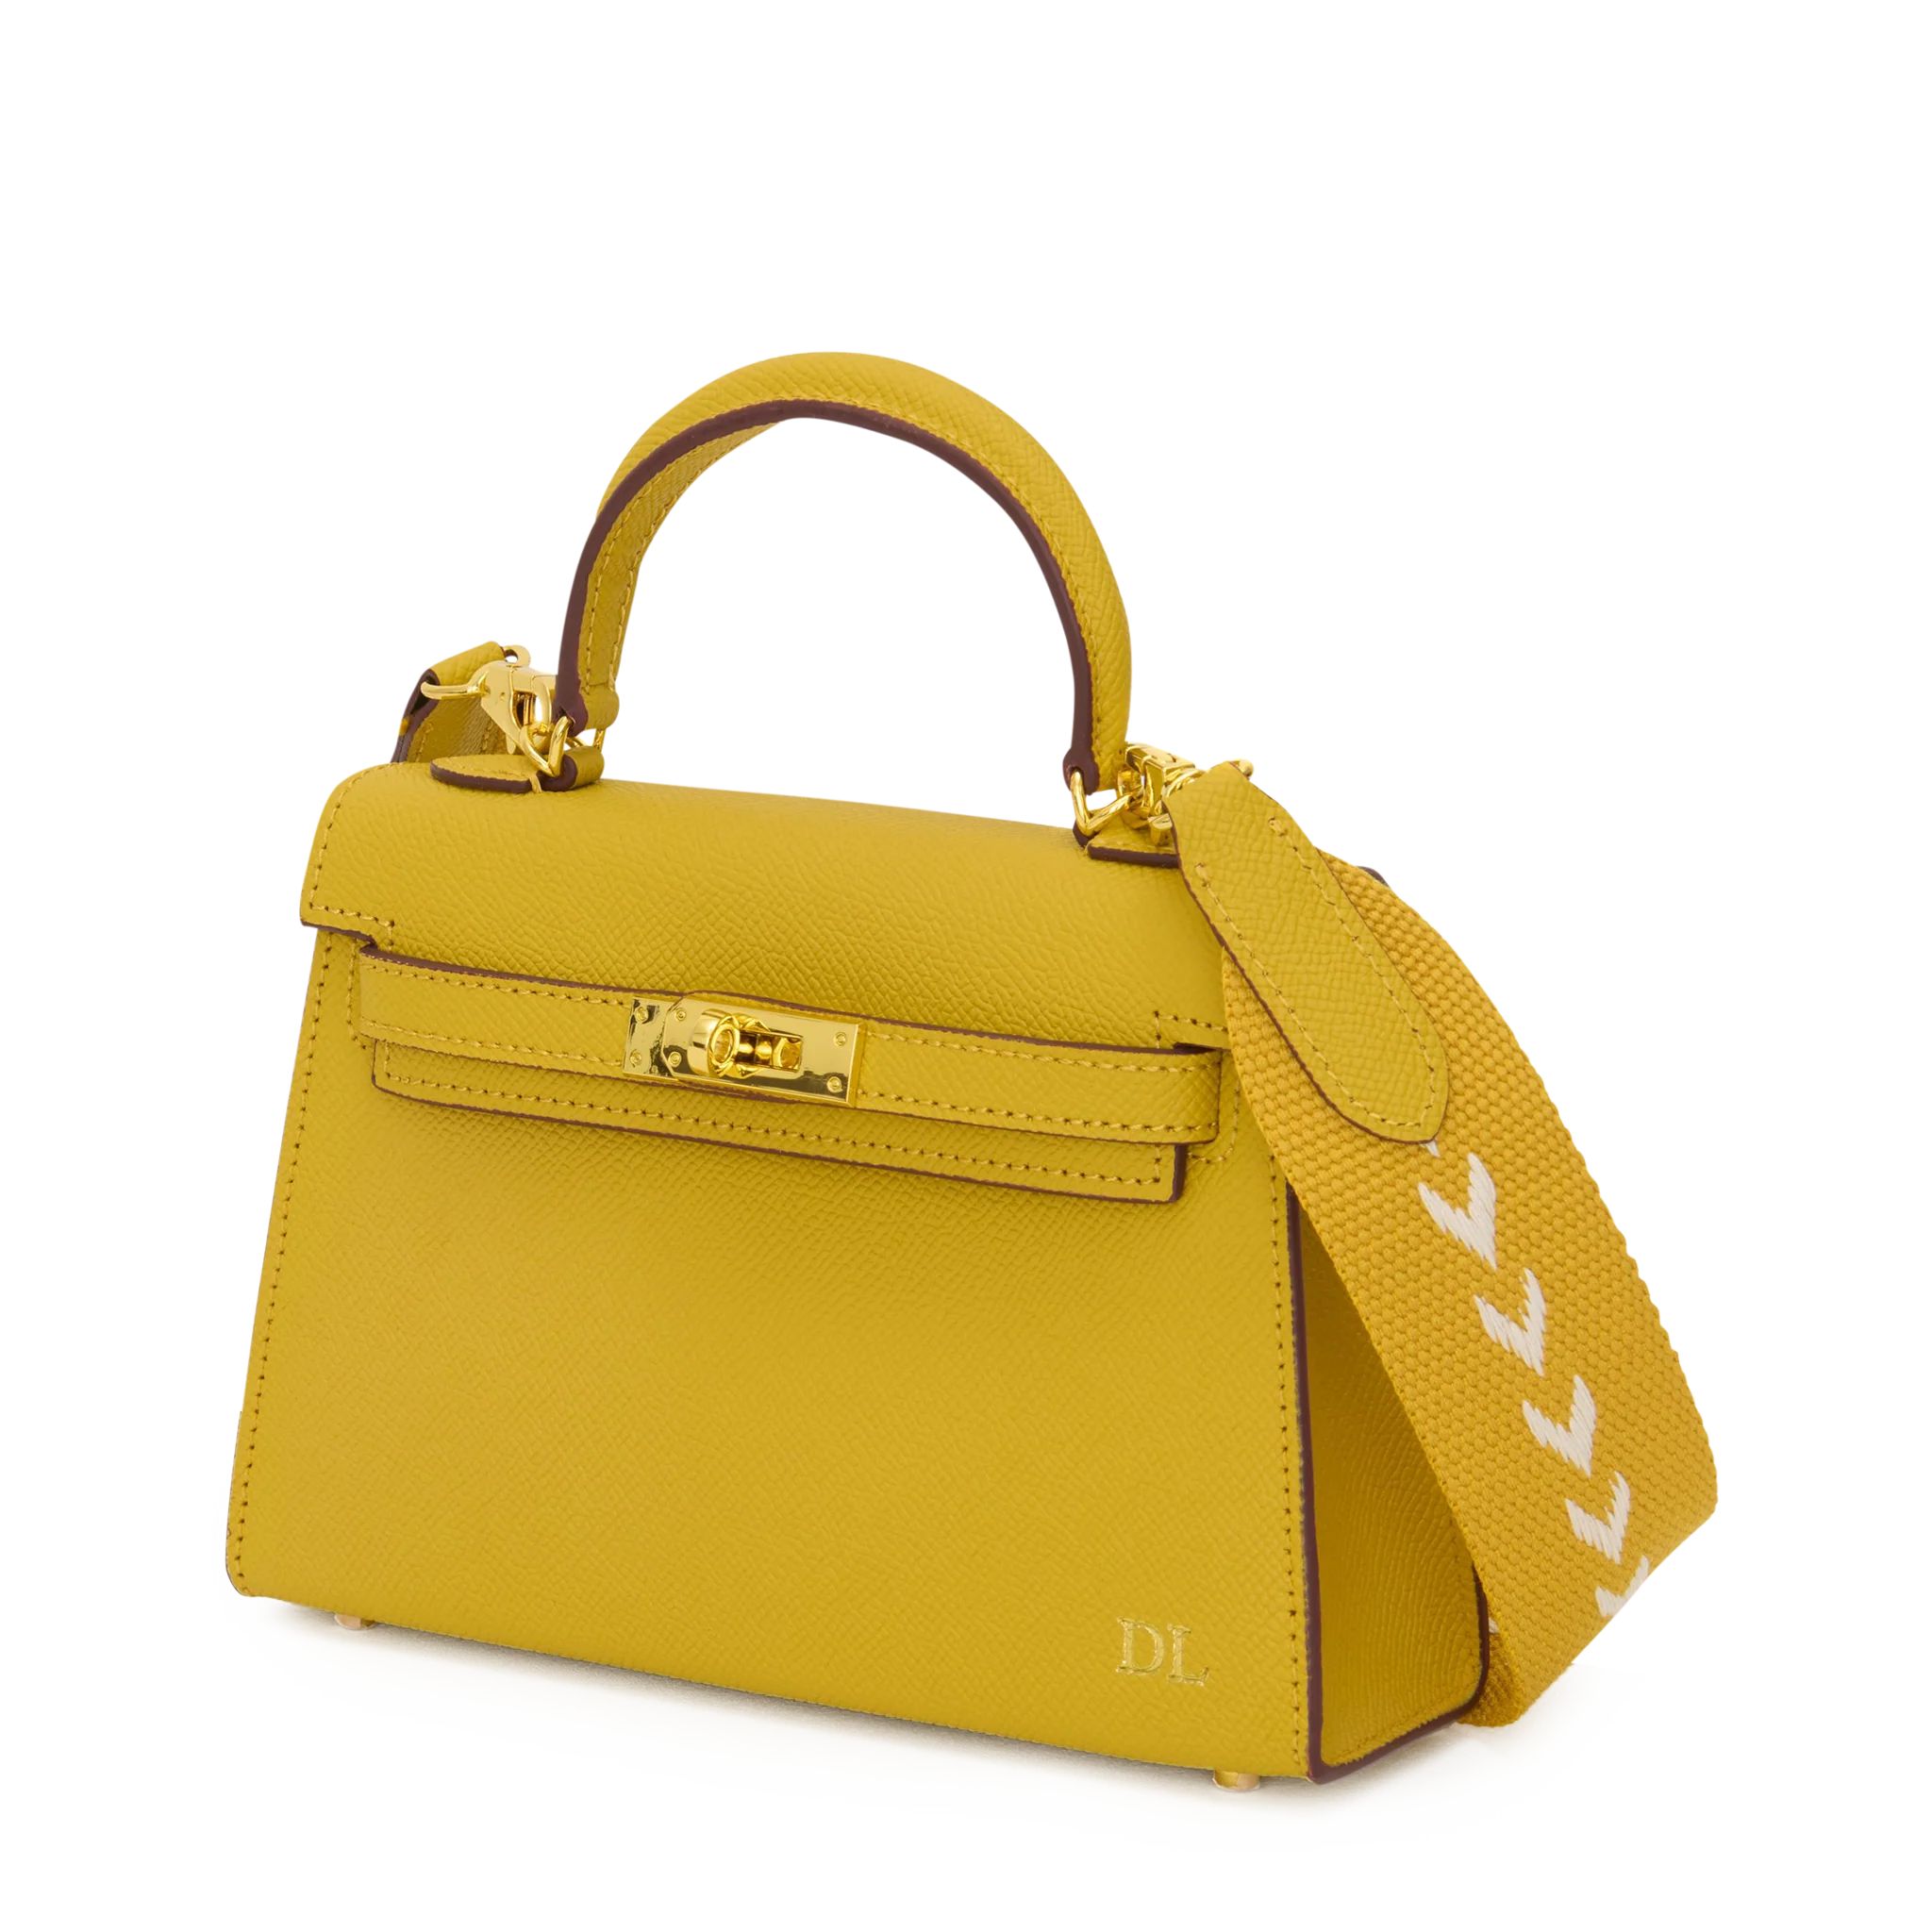 Lily & Bean Hettie Mini Bag - Yellow with Initials & Patterned Strap | Lily and Bean